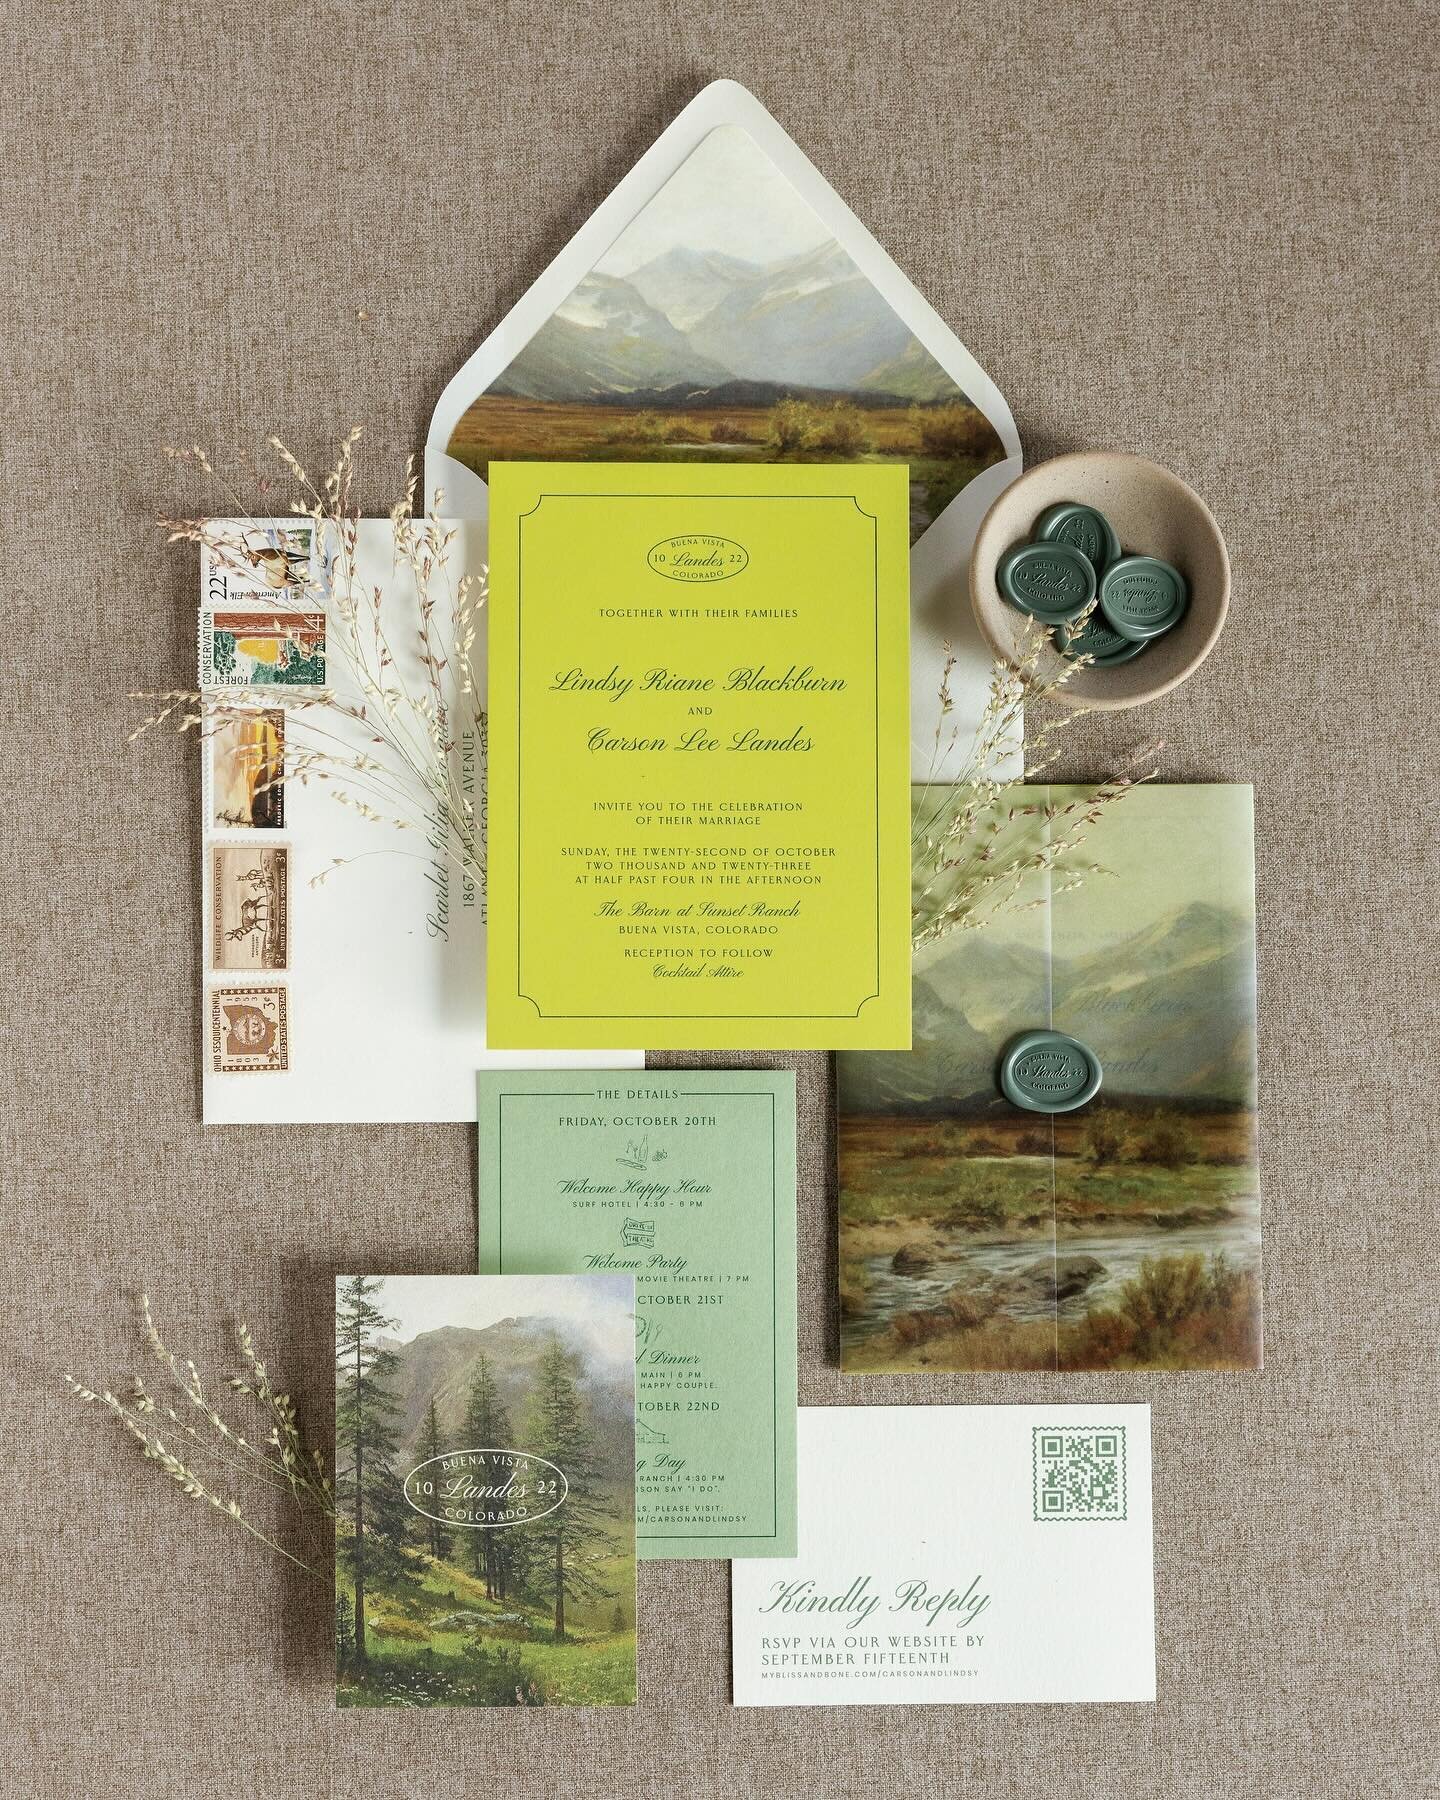 Chartreuse is quickly becoming one of my favorite colors! A twist on the traditional greens palette for a gorgeous mountain wedding in one of my favorite places on earth - Buena Vista, Colorado.

Photo: @spostophoto @invitationstylingco 
Planner: @bi